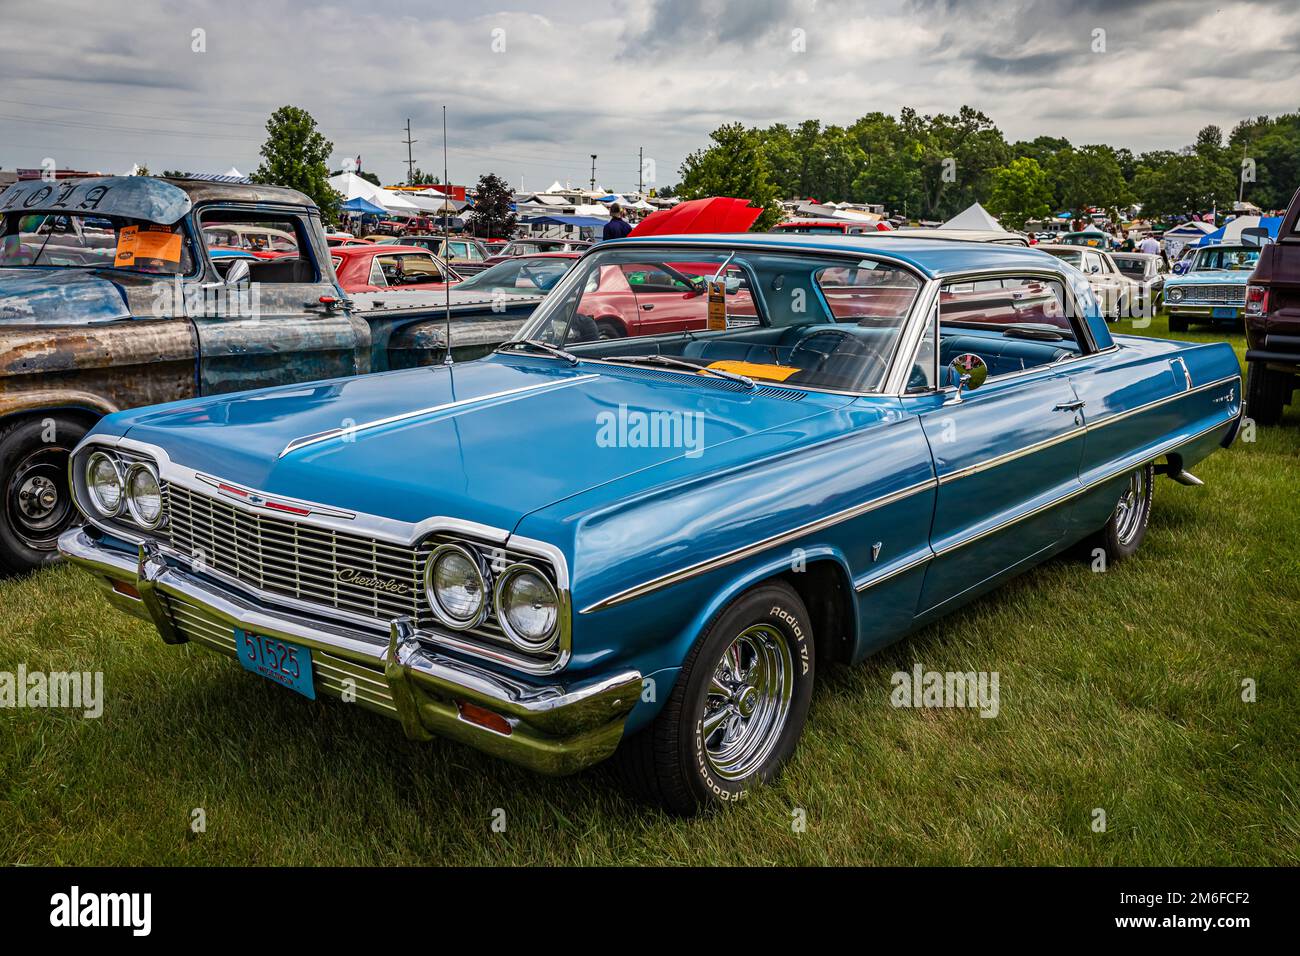 Iola, WI - July 07, 2022: High perspective front corner view of a 1964 Chevrolet Impala Sport Coupe at a local car show. Stock Photo